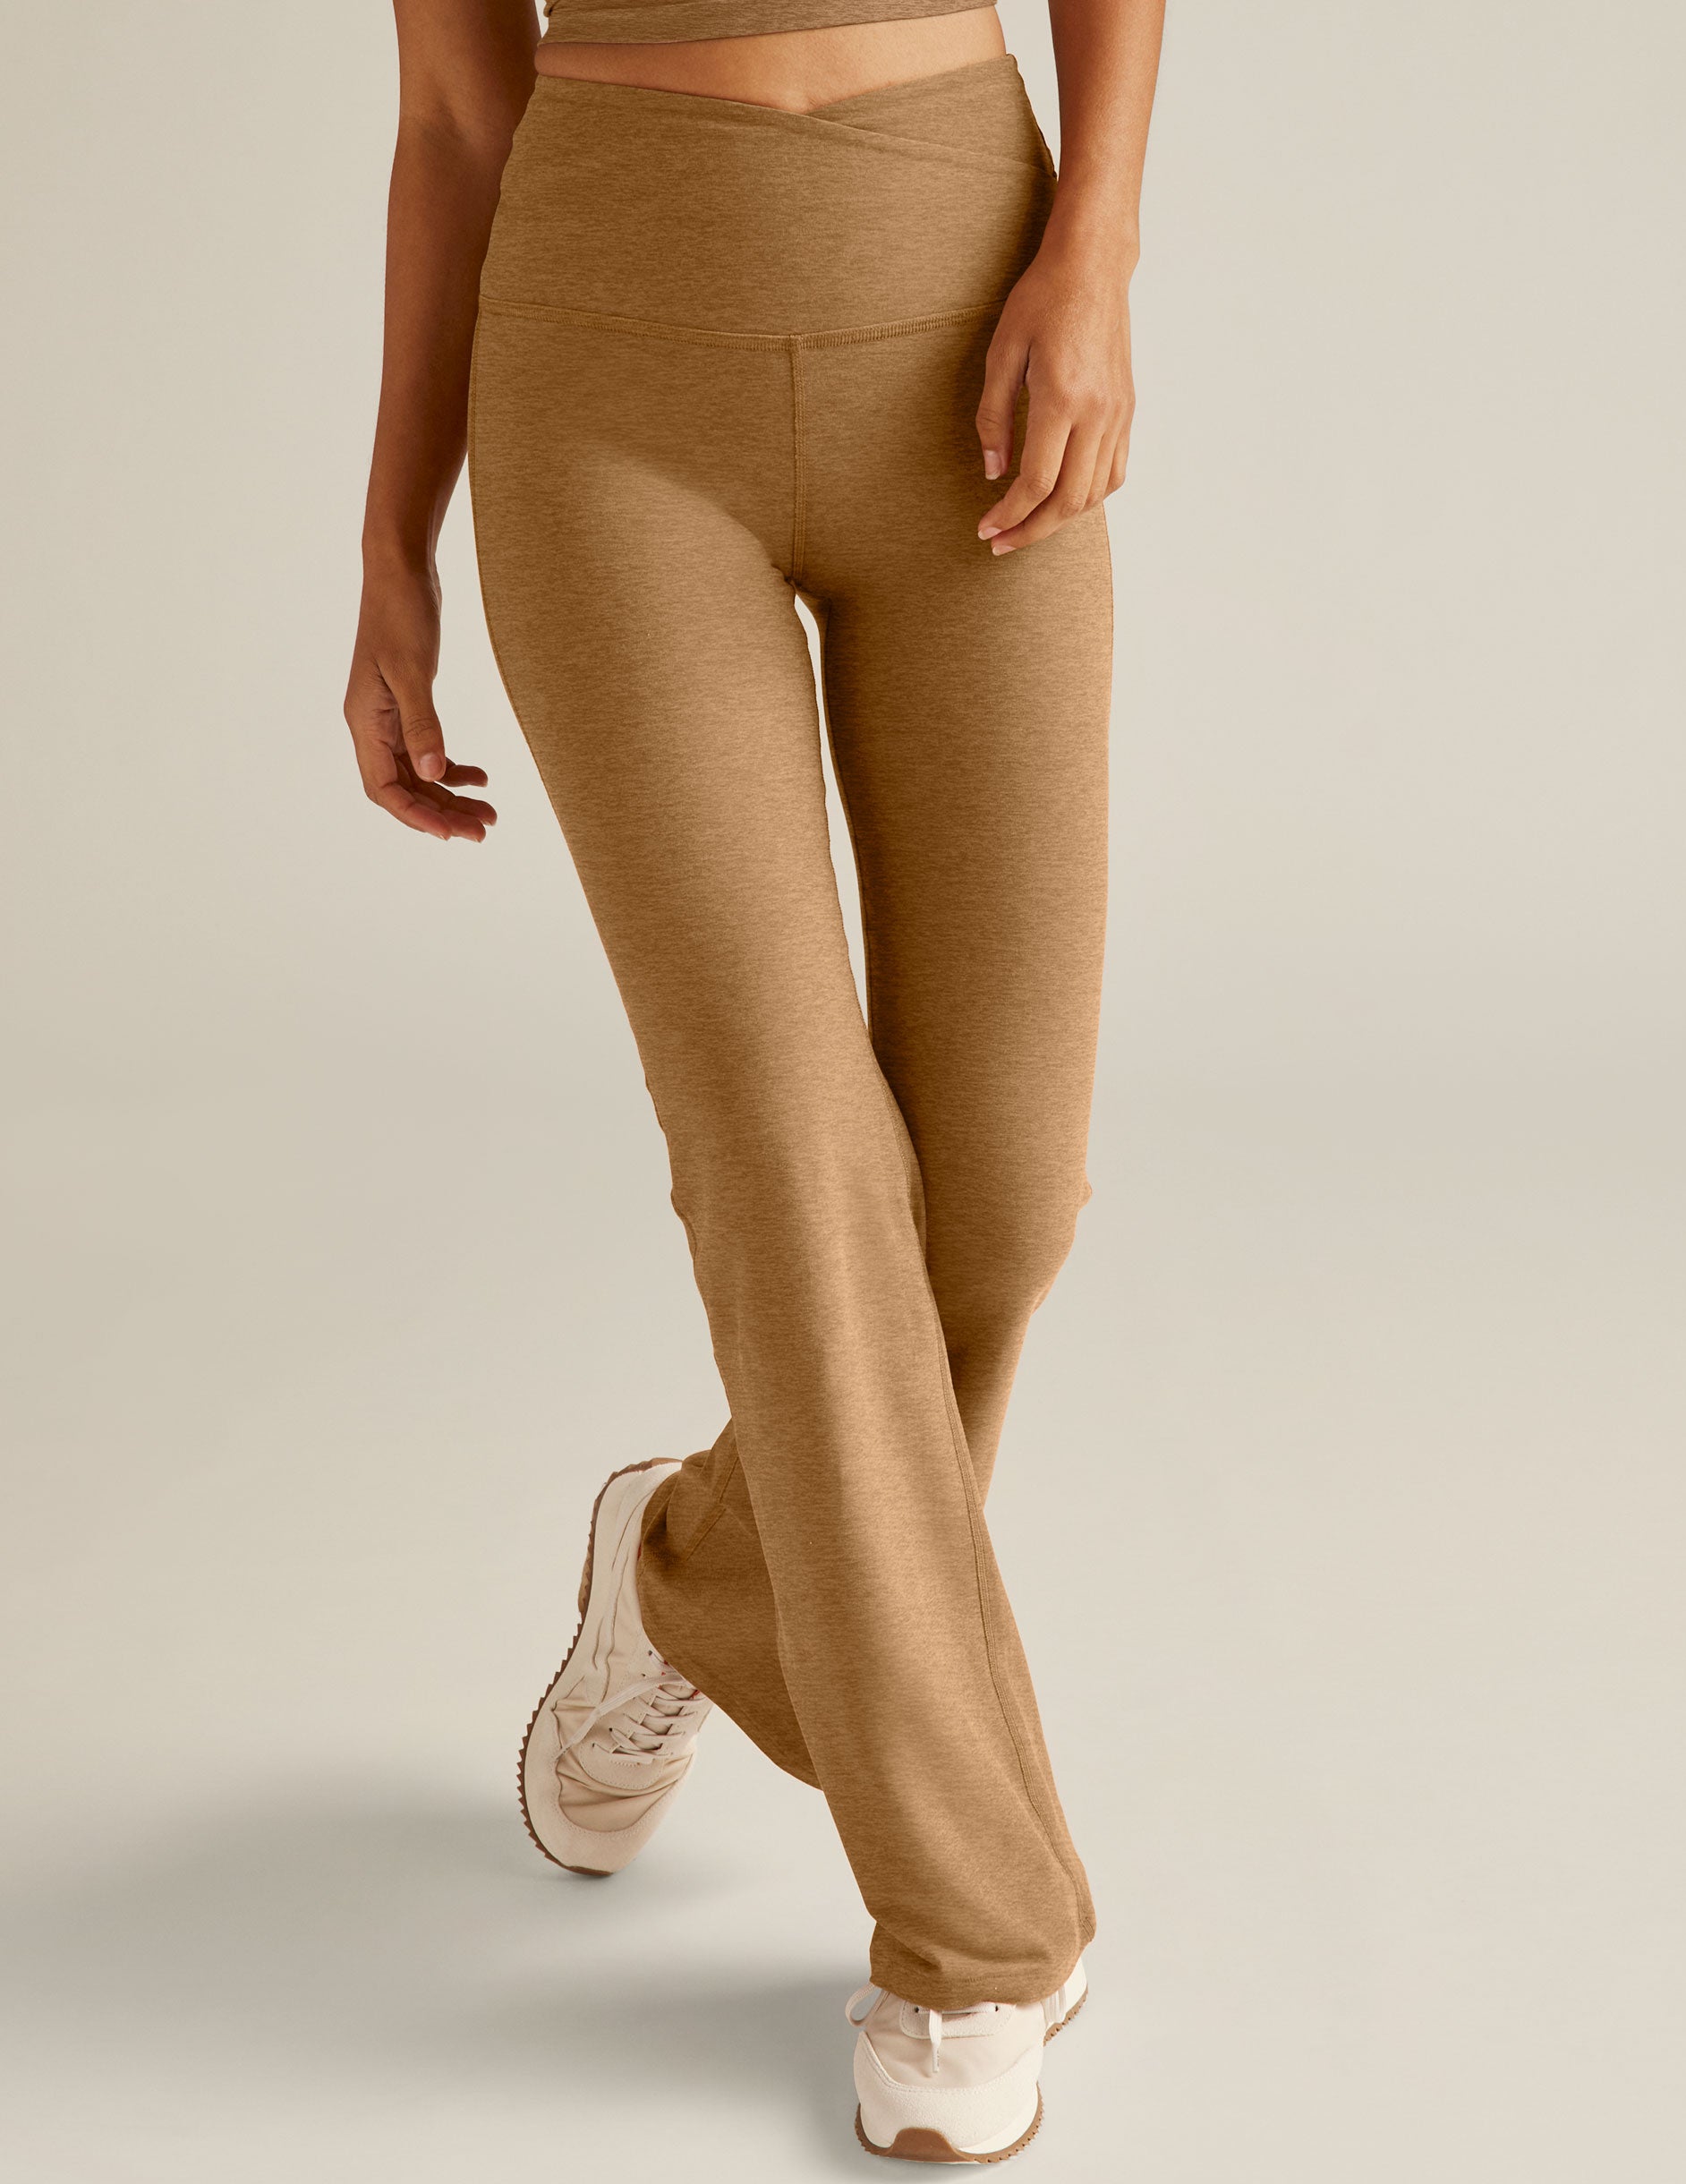 brown high-waisted flare leggings with a crossover detailing on the front waistband. 